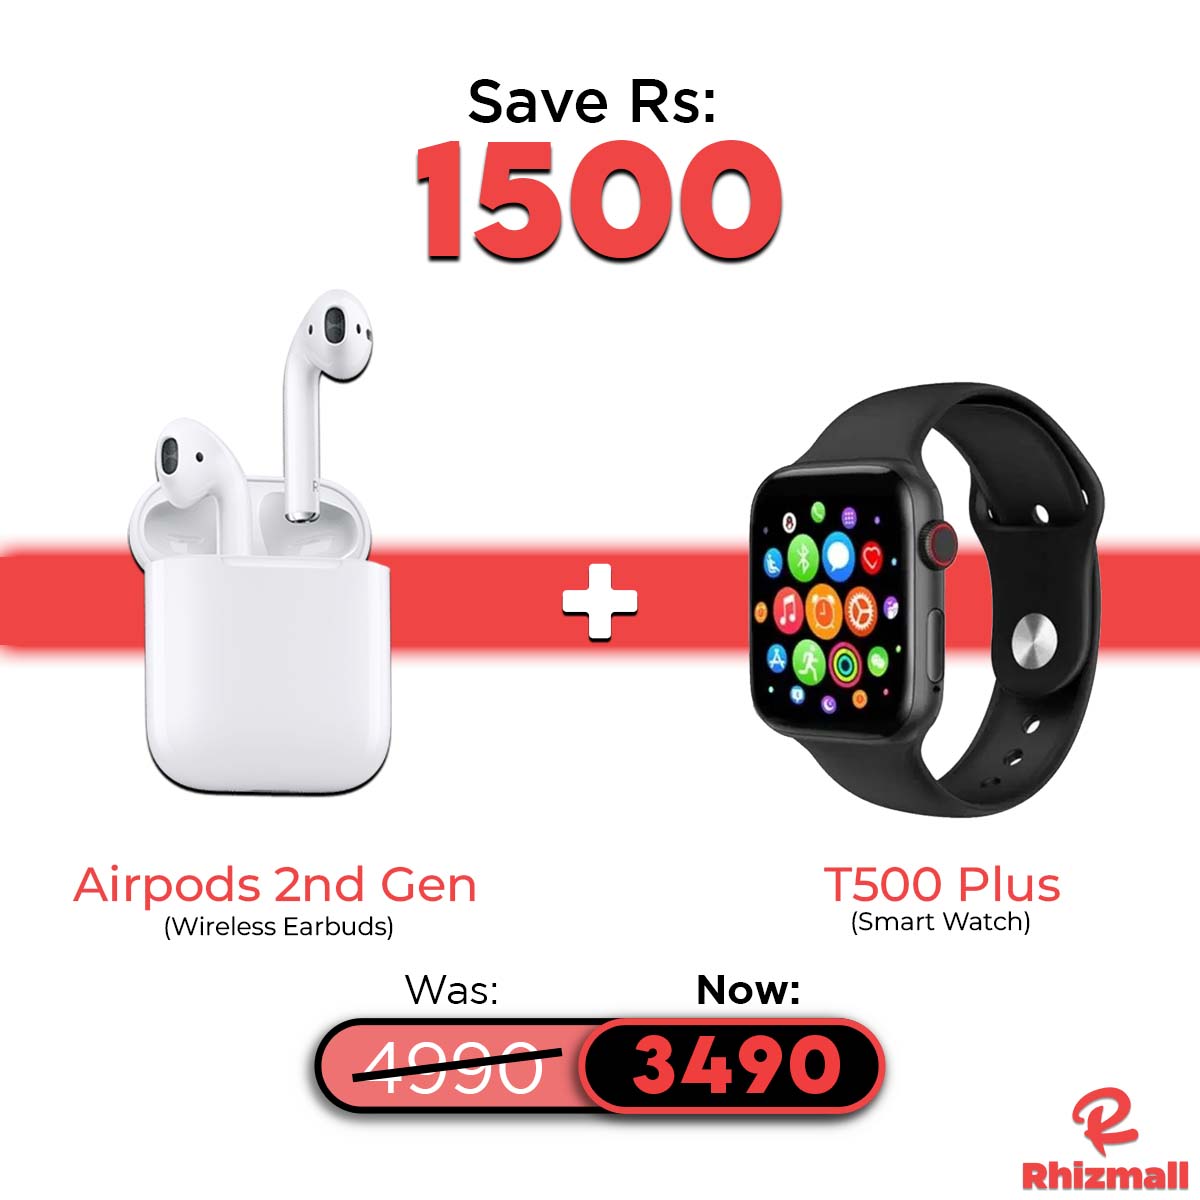 Buy Smart Watches , Earbuds, Ring Light , Gamepad, Thumb sleeves, in Combos , With Huge Discount only at Rhizmall.pk